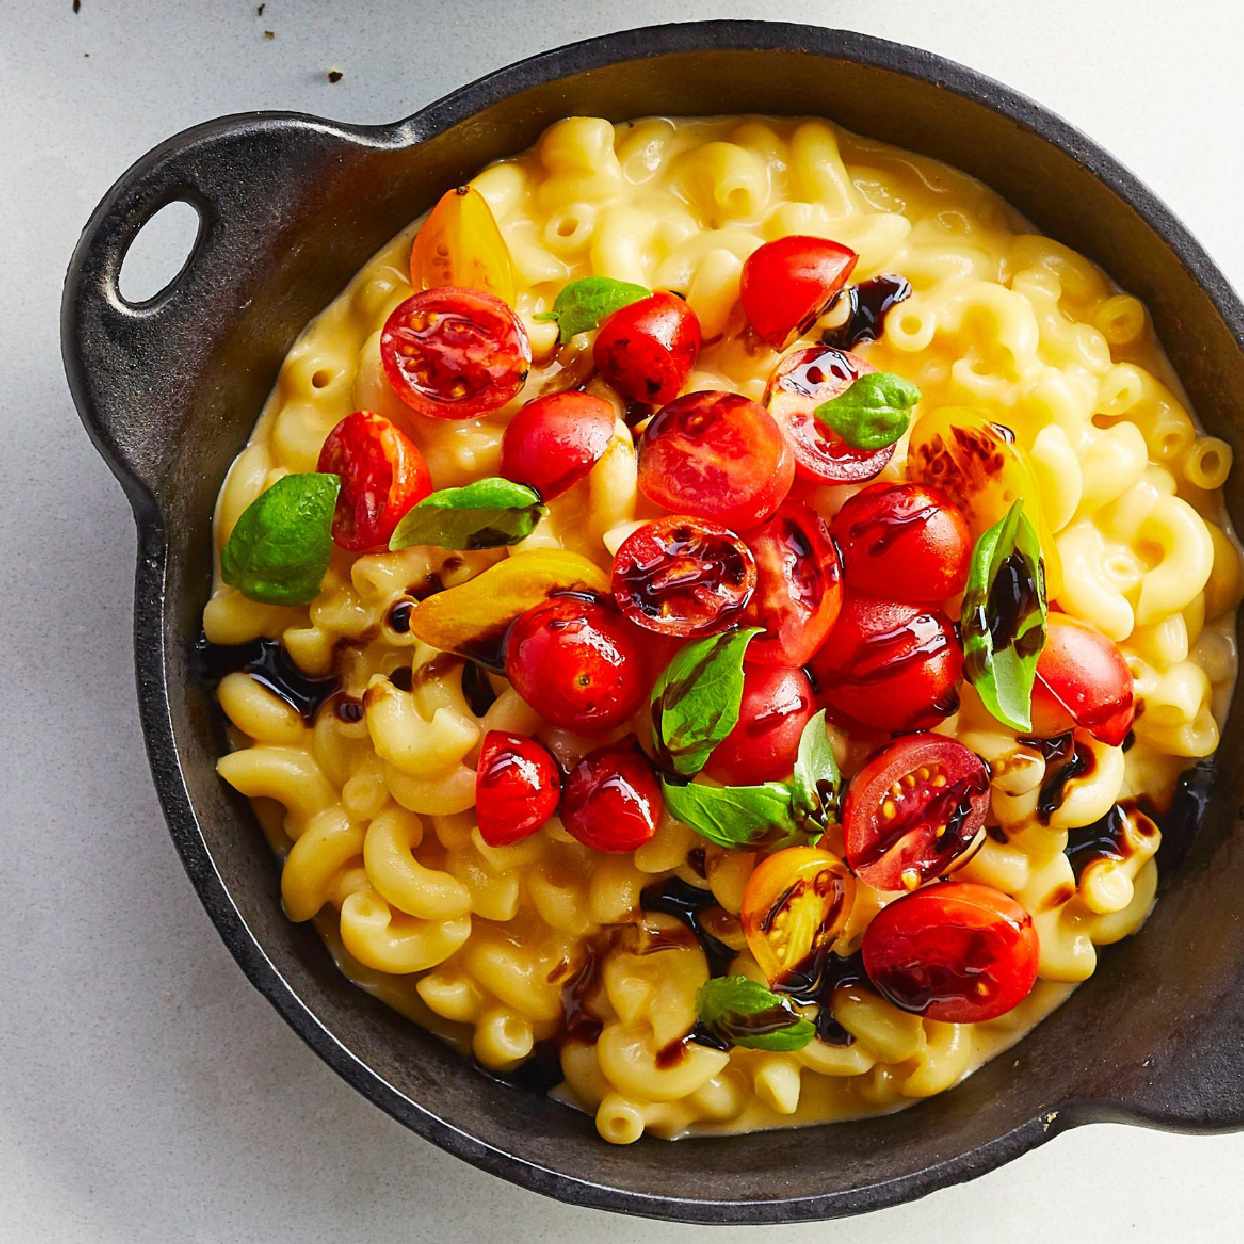 Bowl of mac and cheese with cherry tomatoes, basil leaves, and balsamic glaze over the top